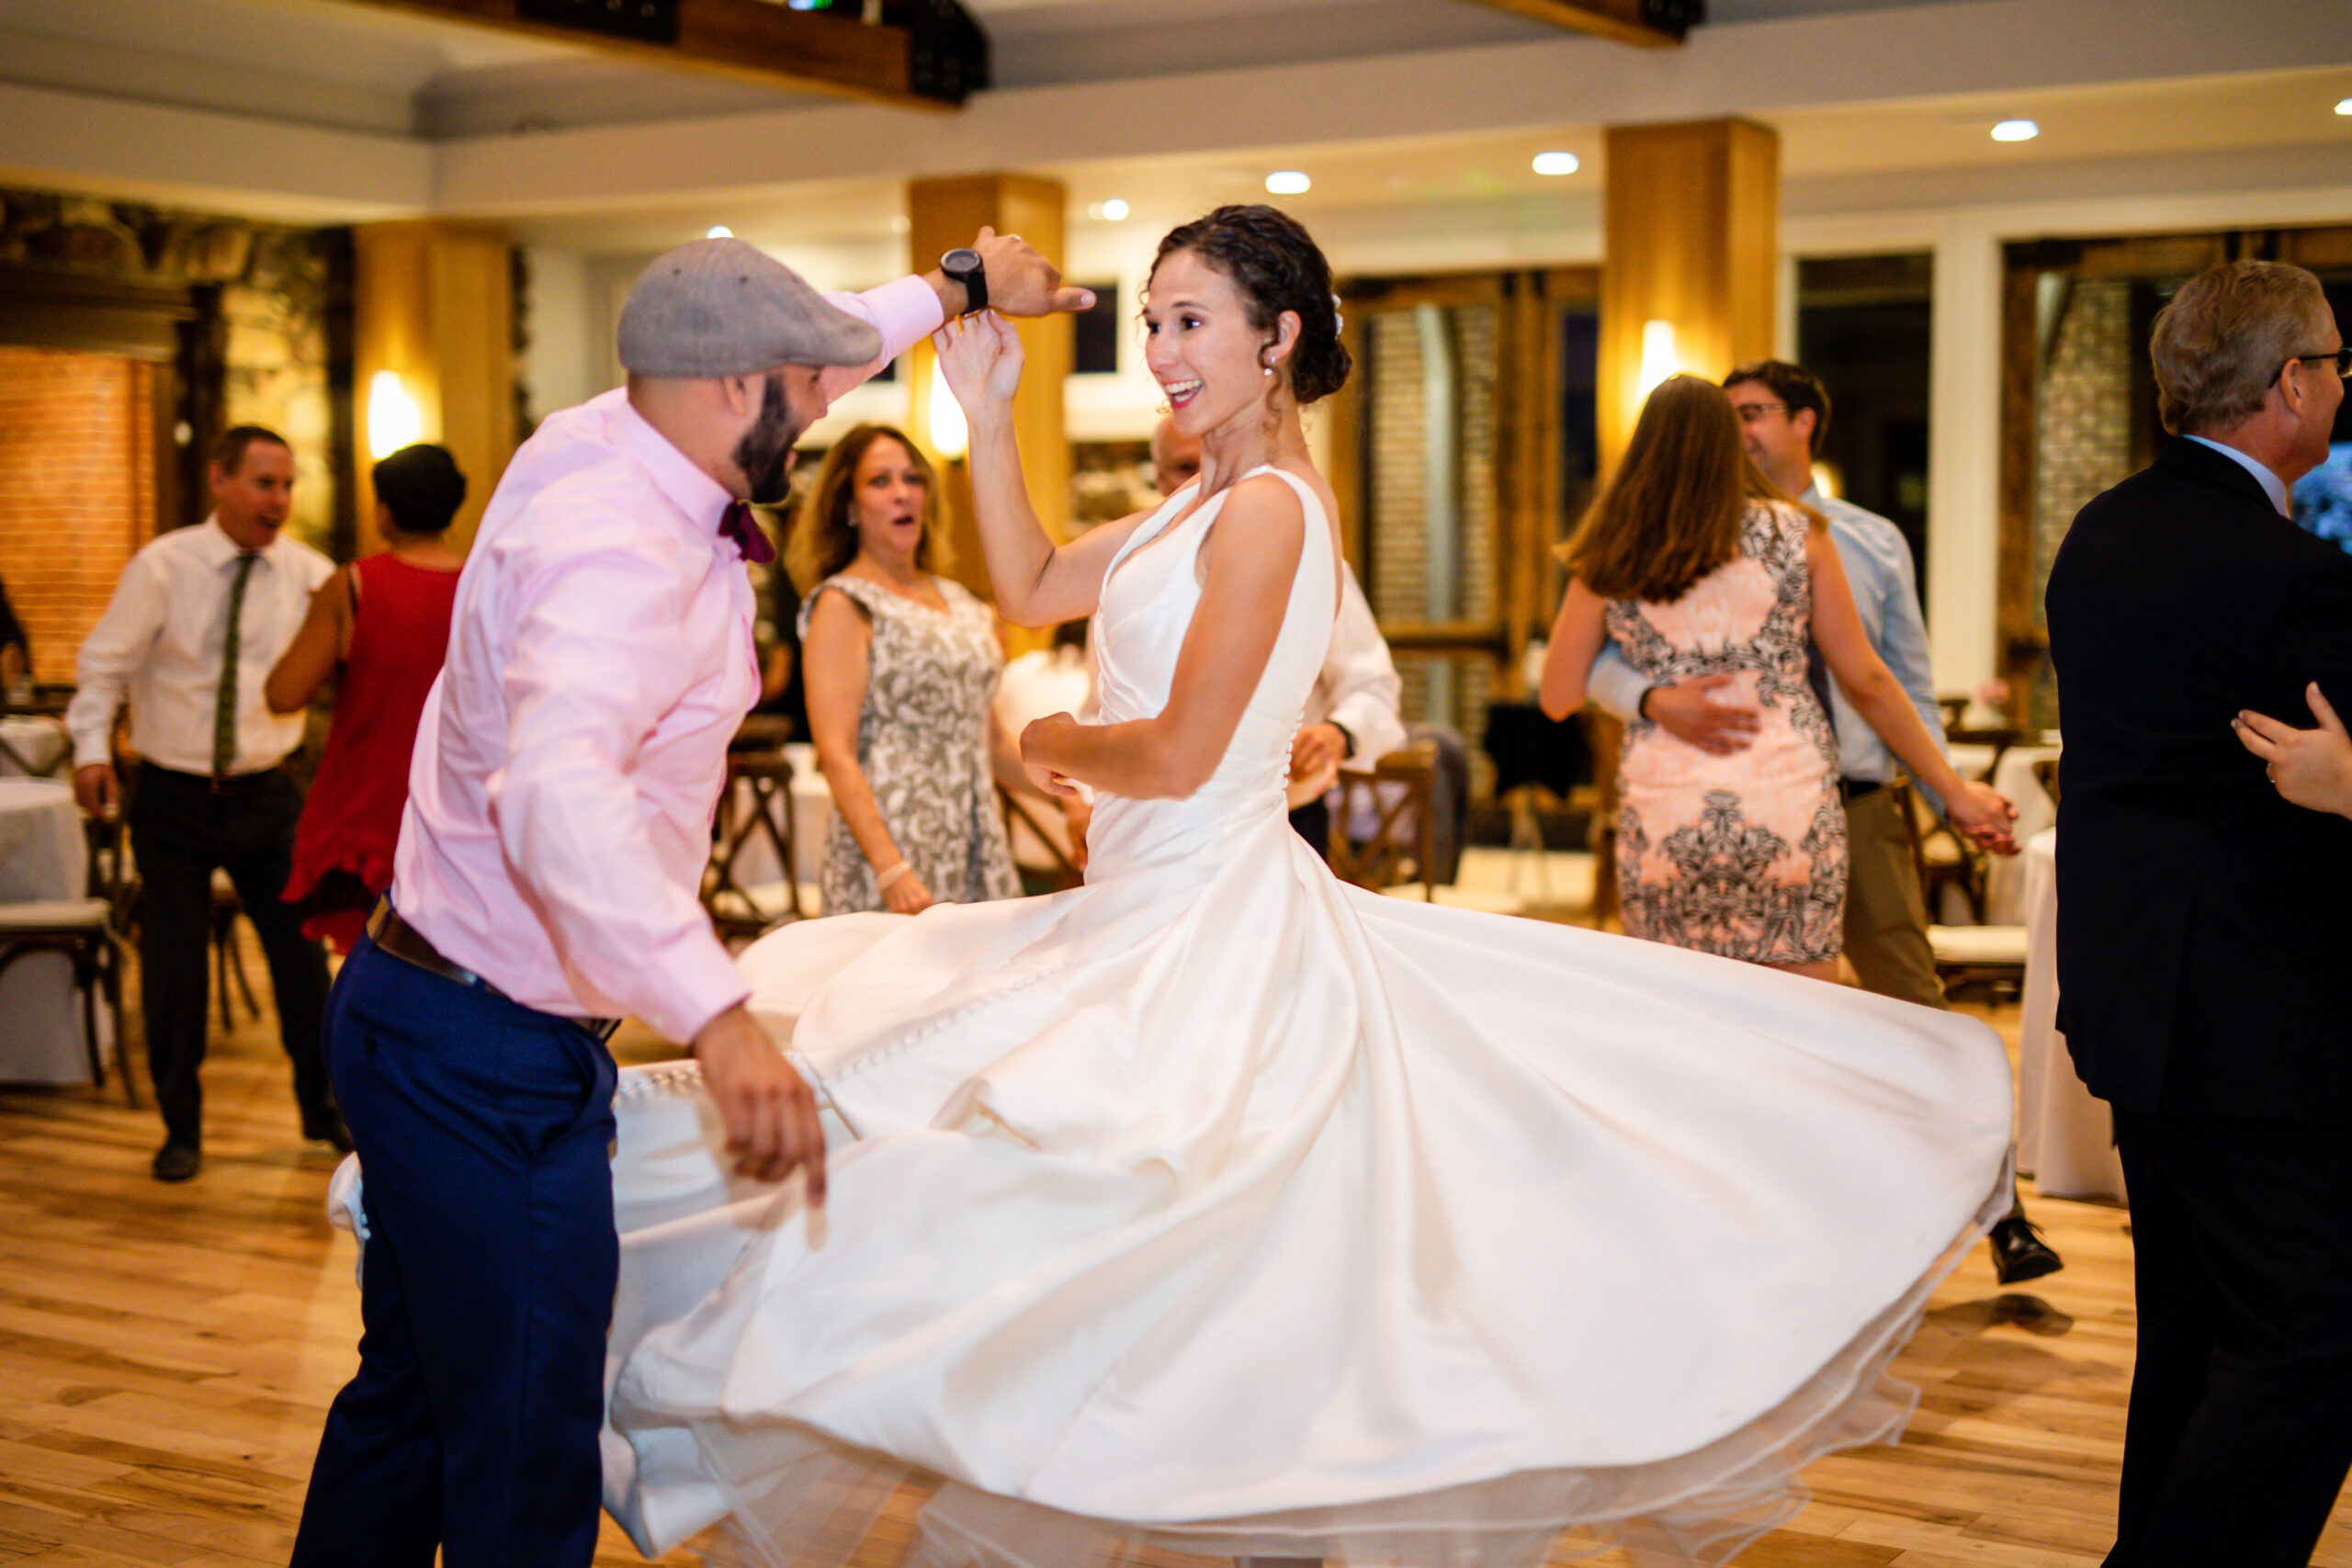 A couple dances at their wedding reception, her dress twirls beautifully.